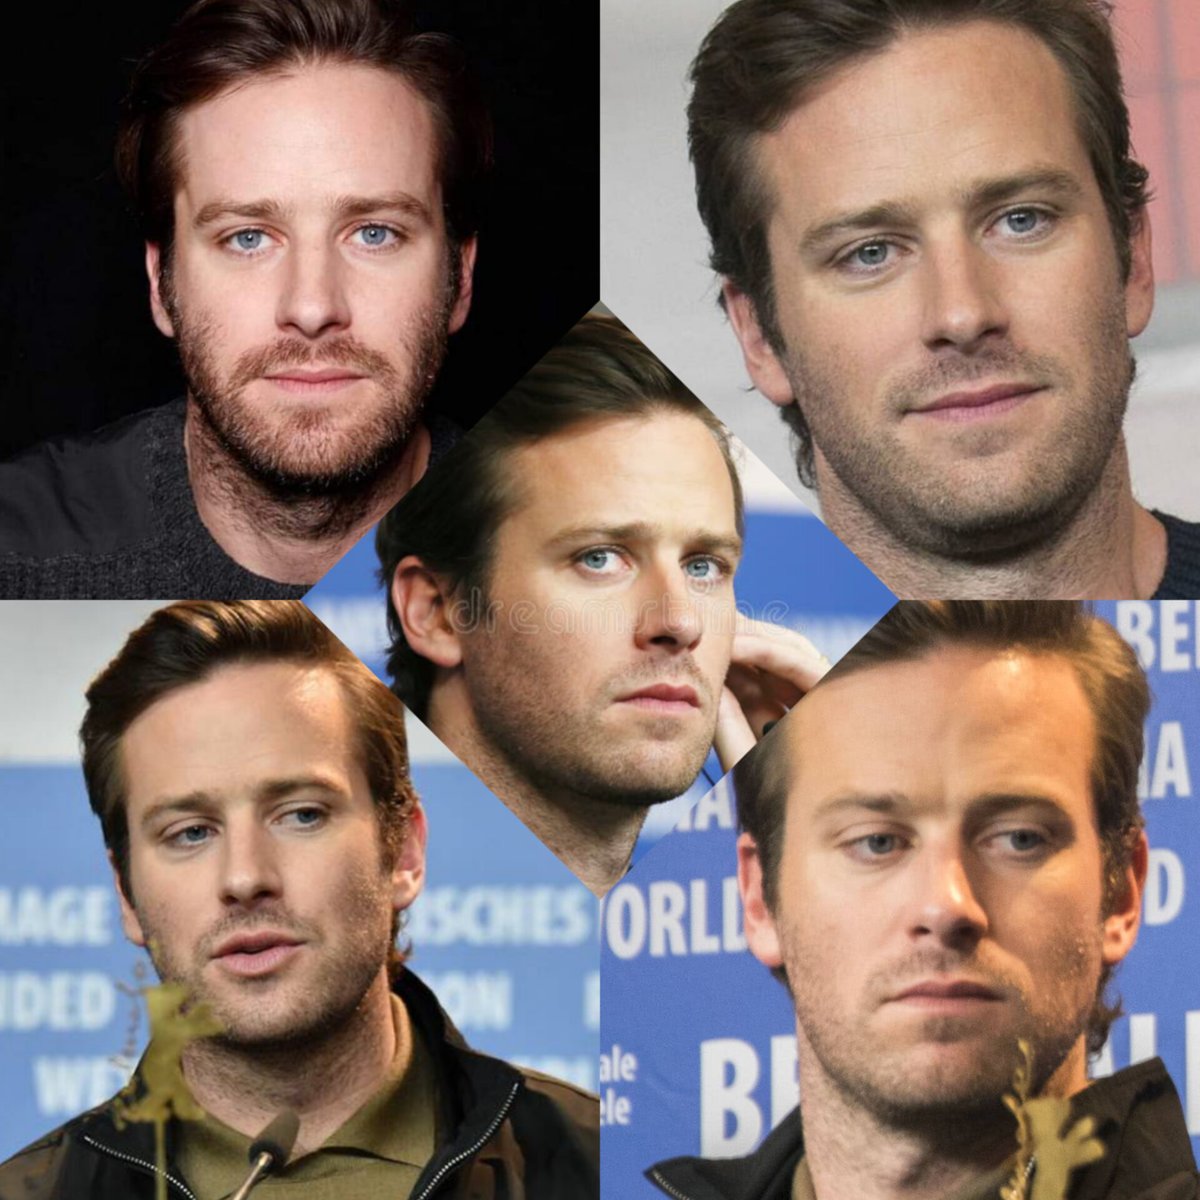 Being yourself is a brave choice.
#supportarmiehammer
#ArmieHammer 
#TheBest